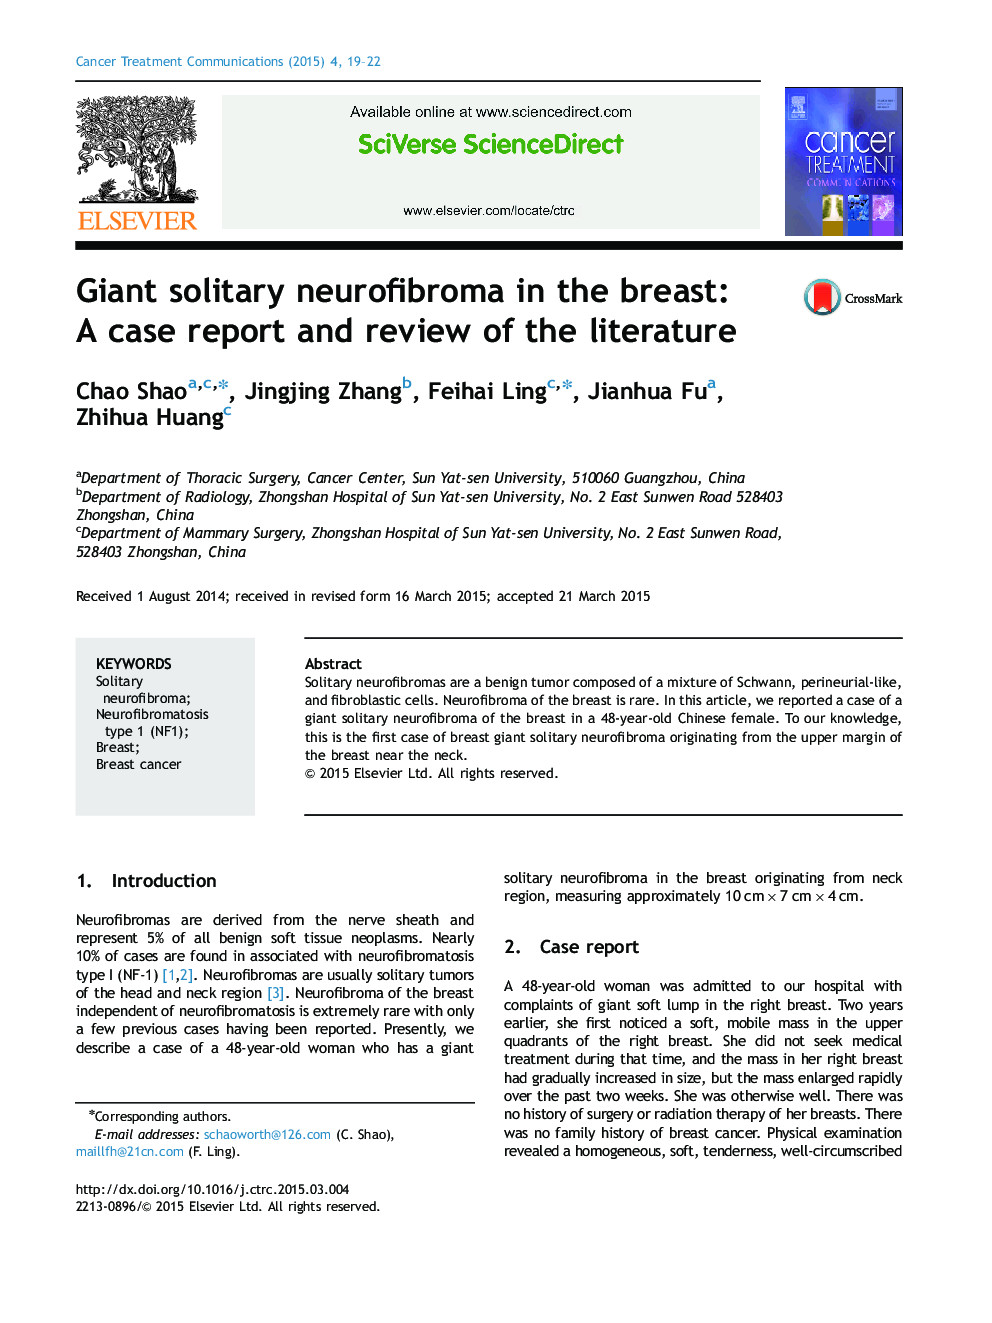 Giant solitary neurofibroma in the breast: A case report and review of the literature